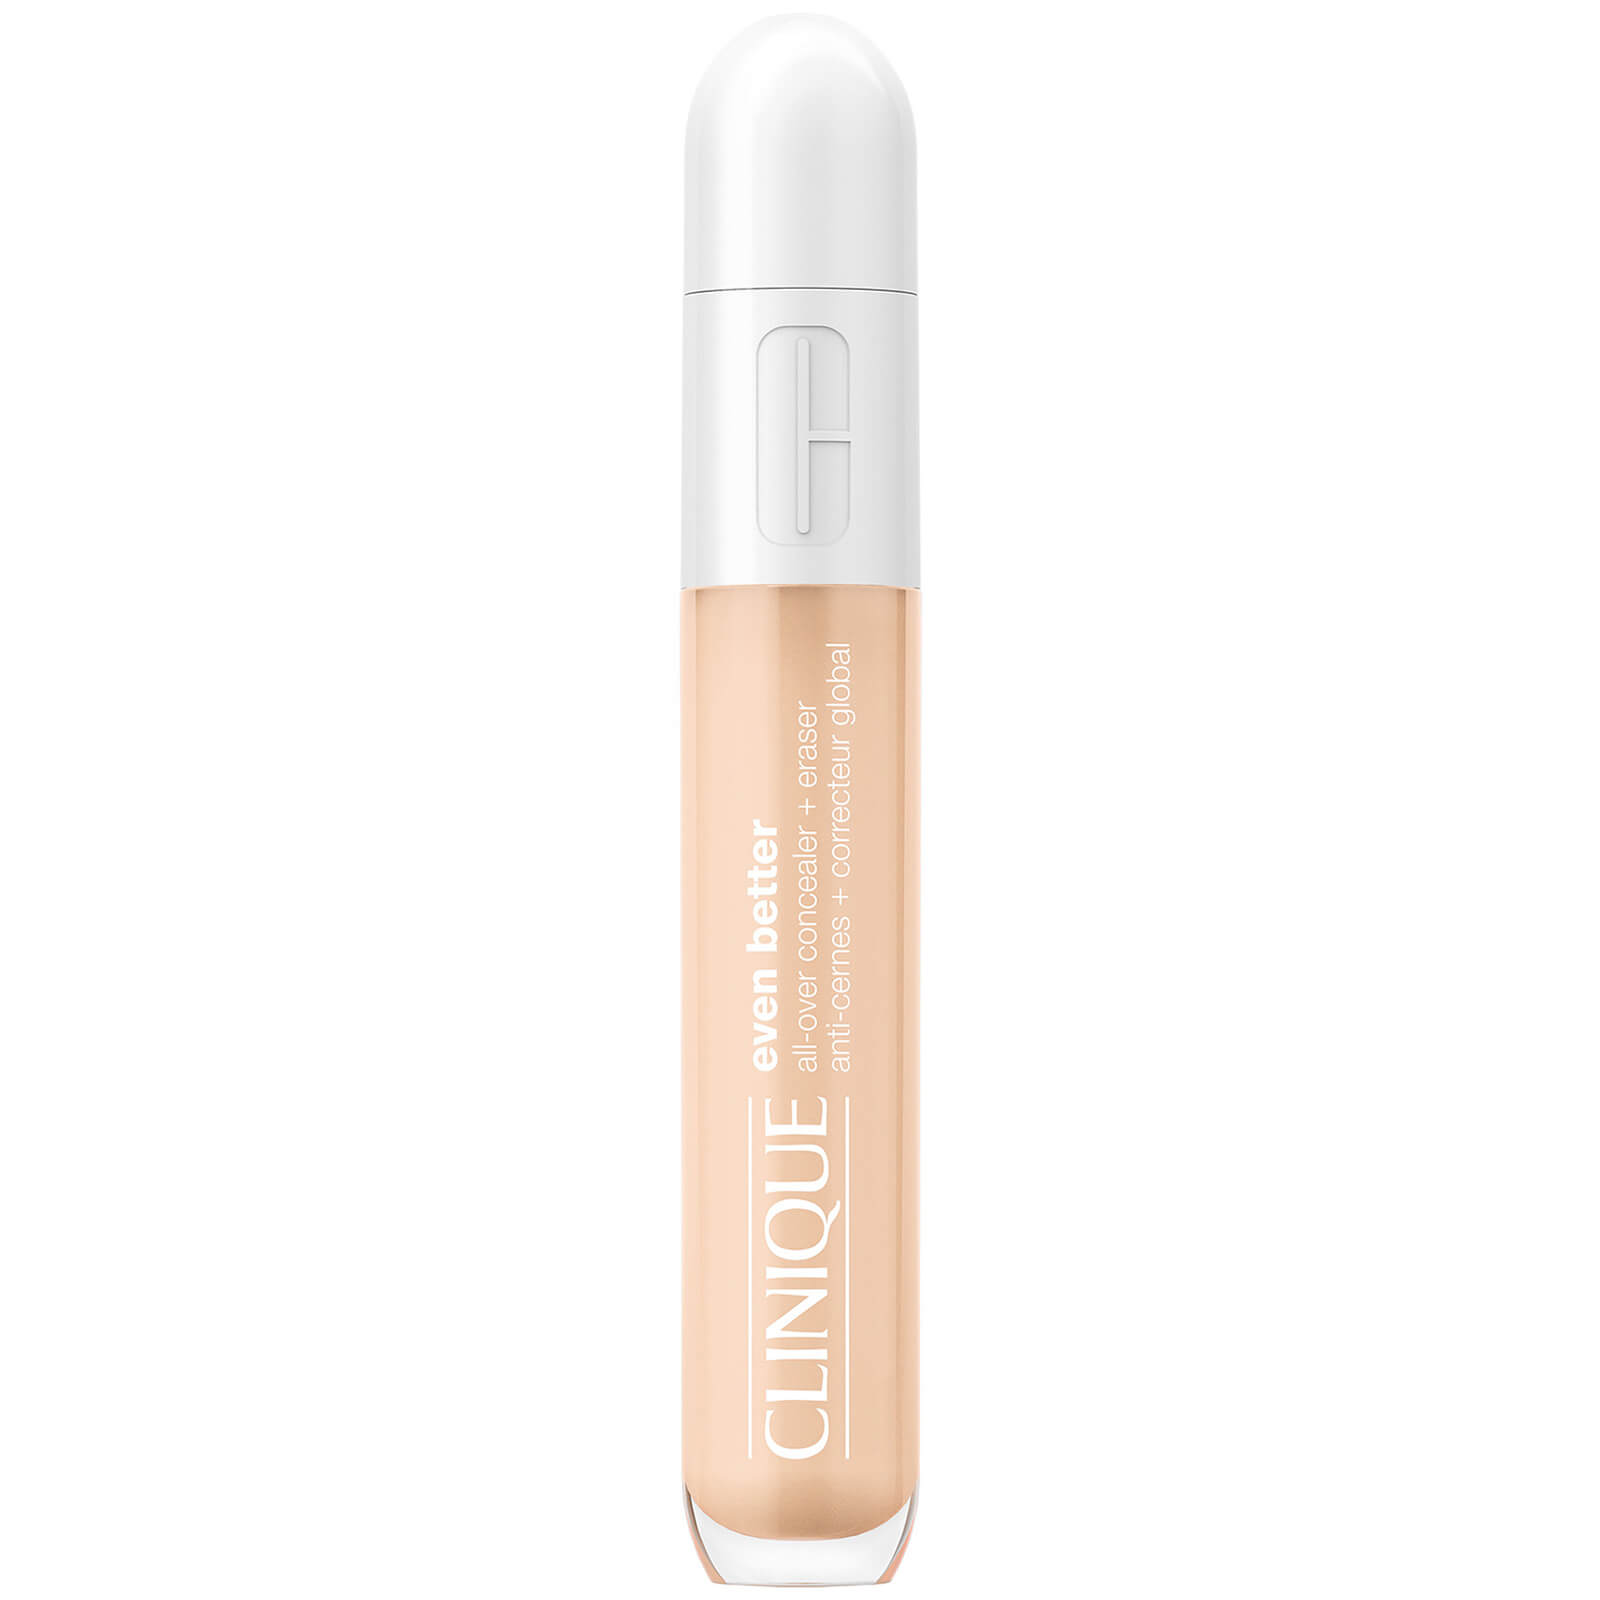 Clinique Even Better All-Over Concealer and Eraser 6ml (Various Shades) - CN 10 Alabaster